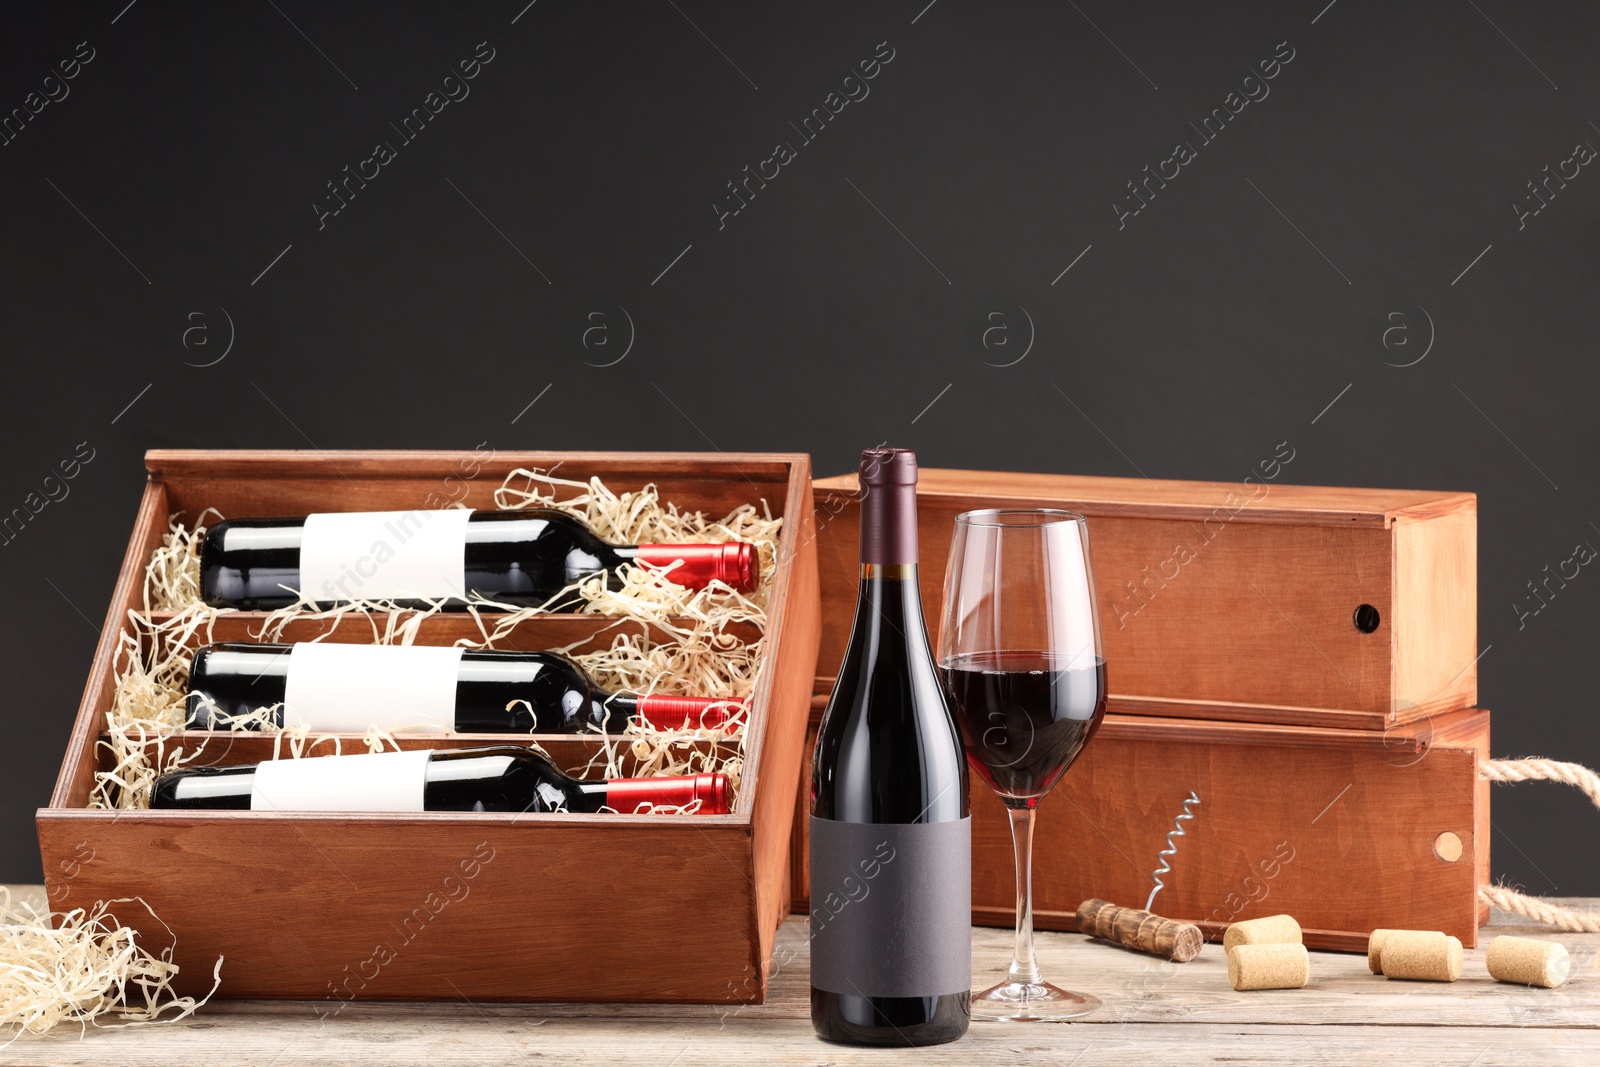 Photo of Box with wine bottles, glass, corks and corkscrew on wooden table against black background